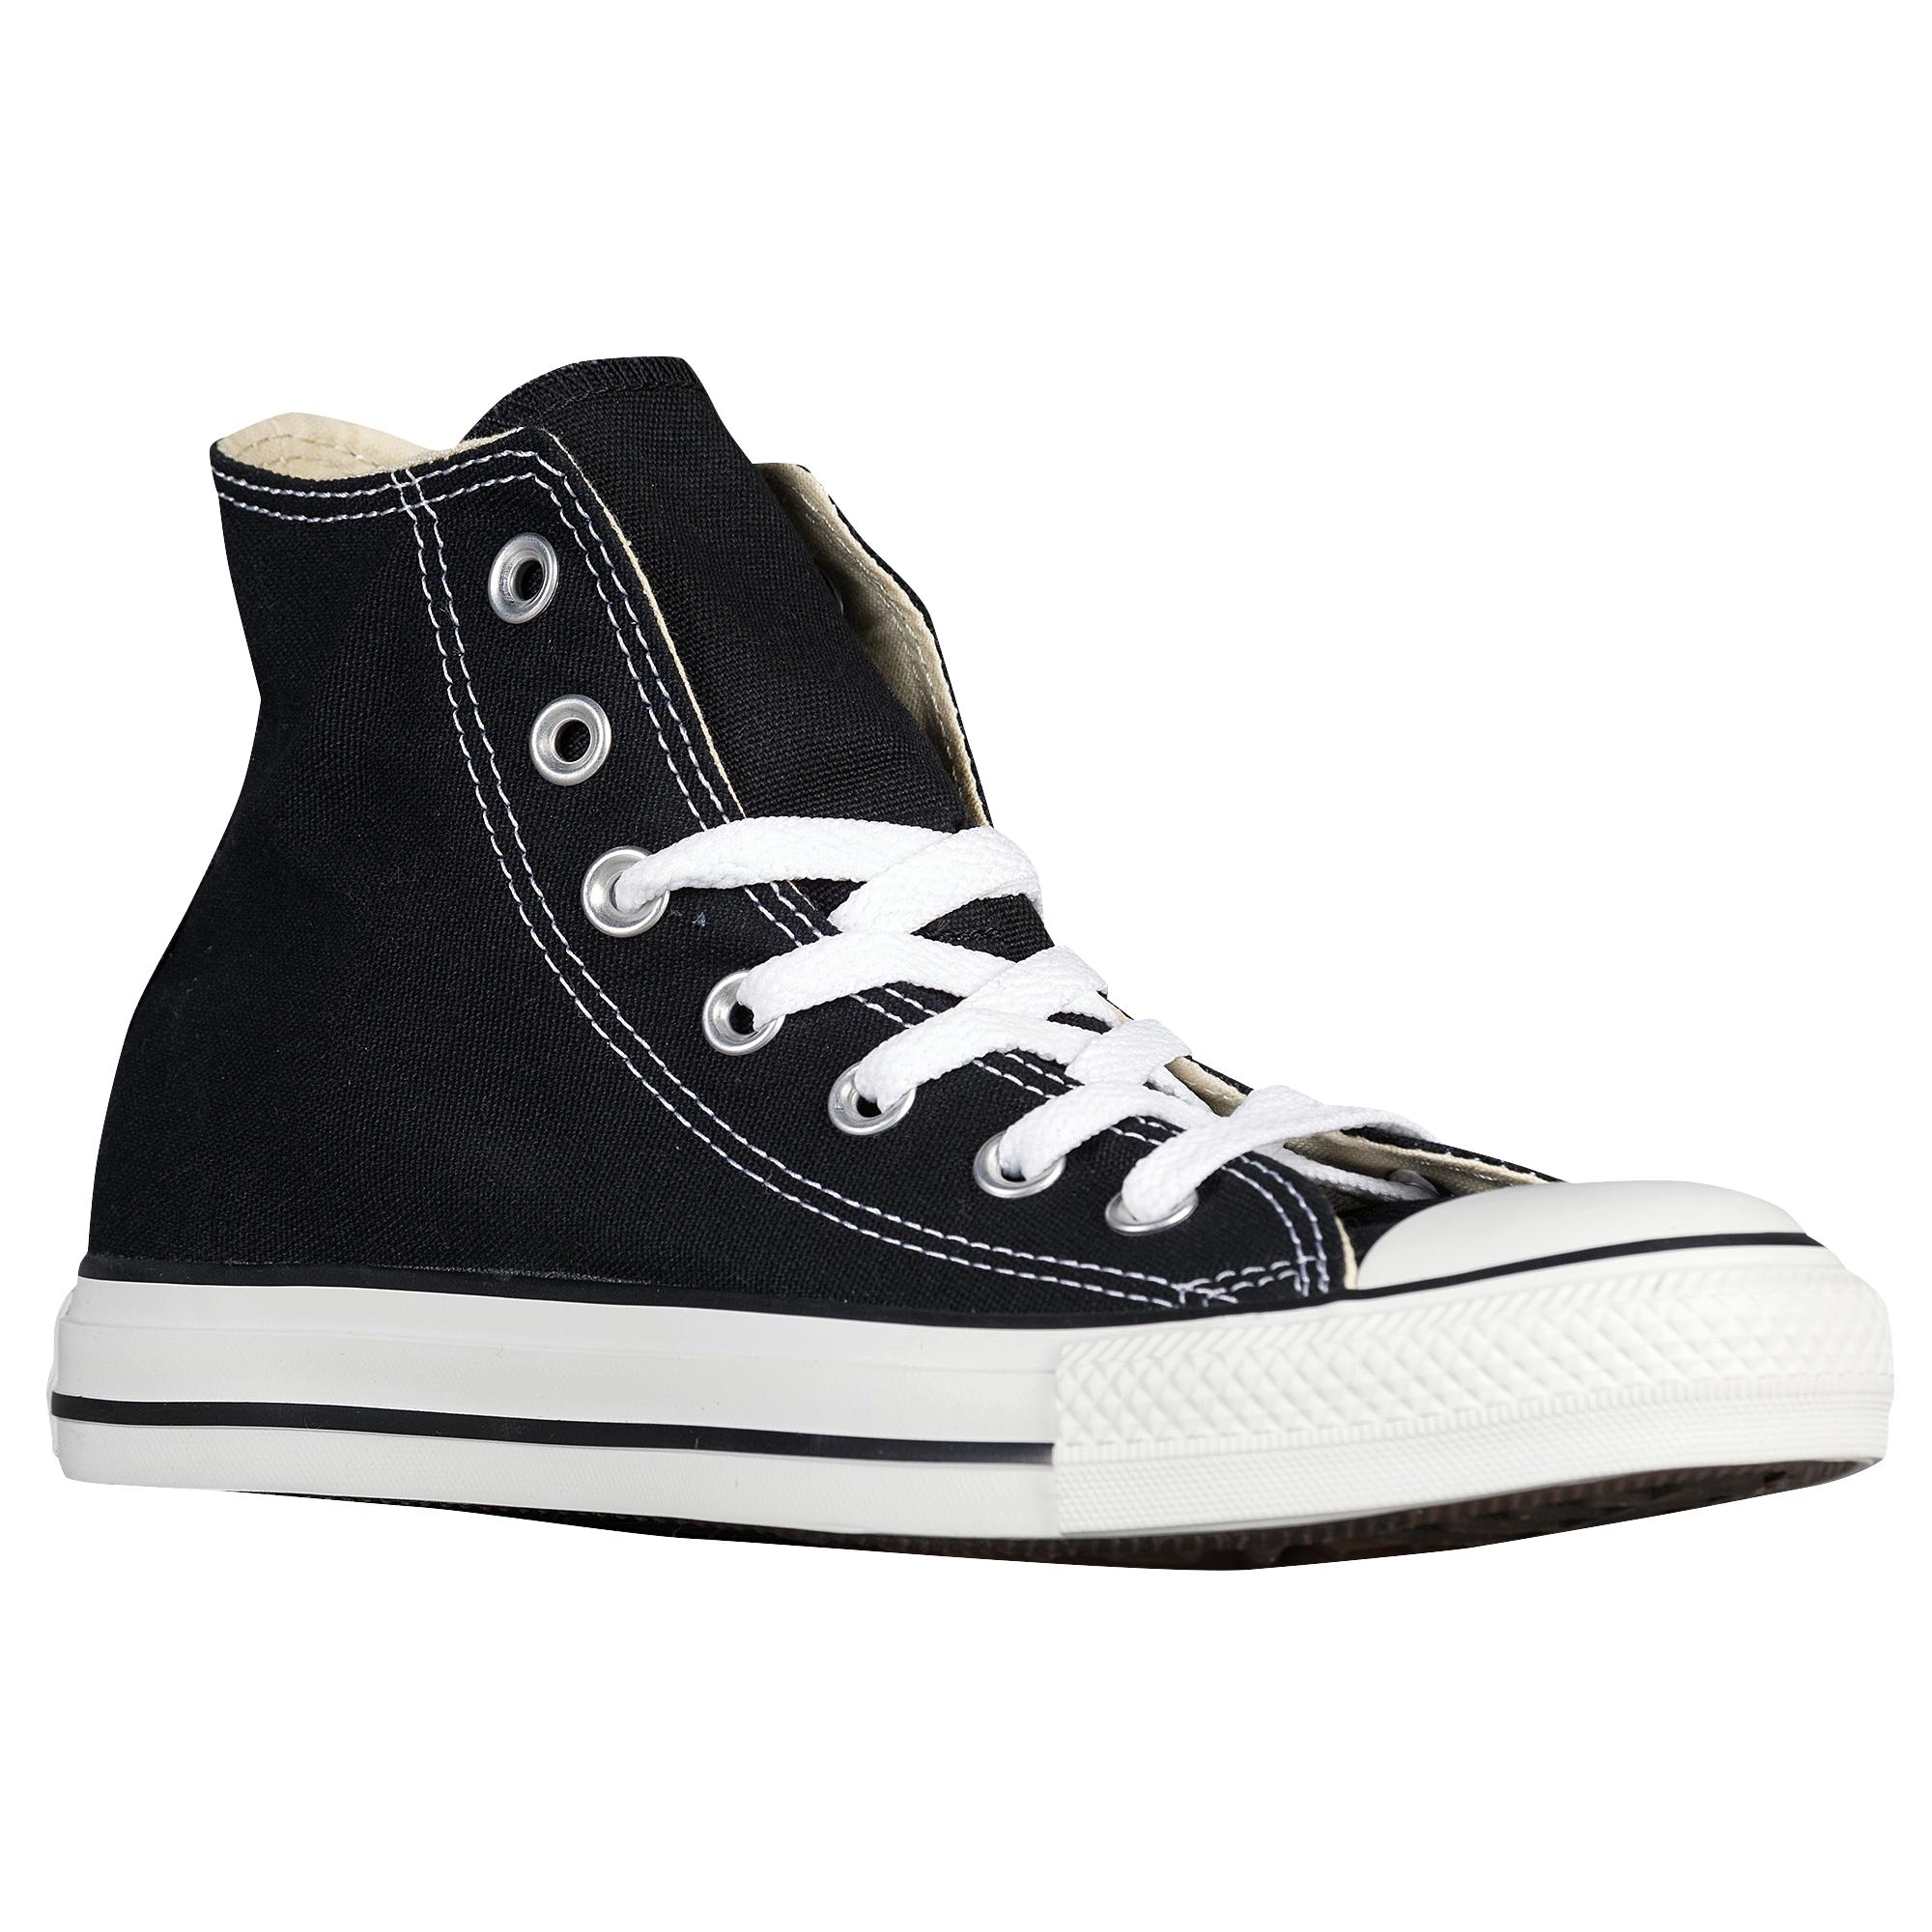 Converse Canvas All Star Hi Basketball Shoes in Black/White (Black) for ...